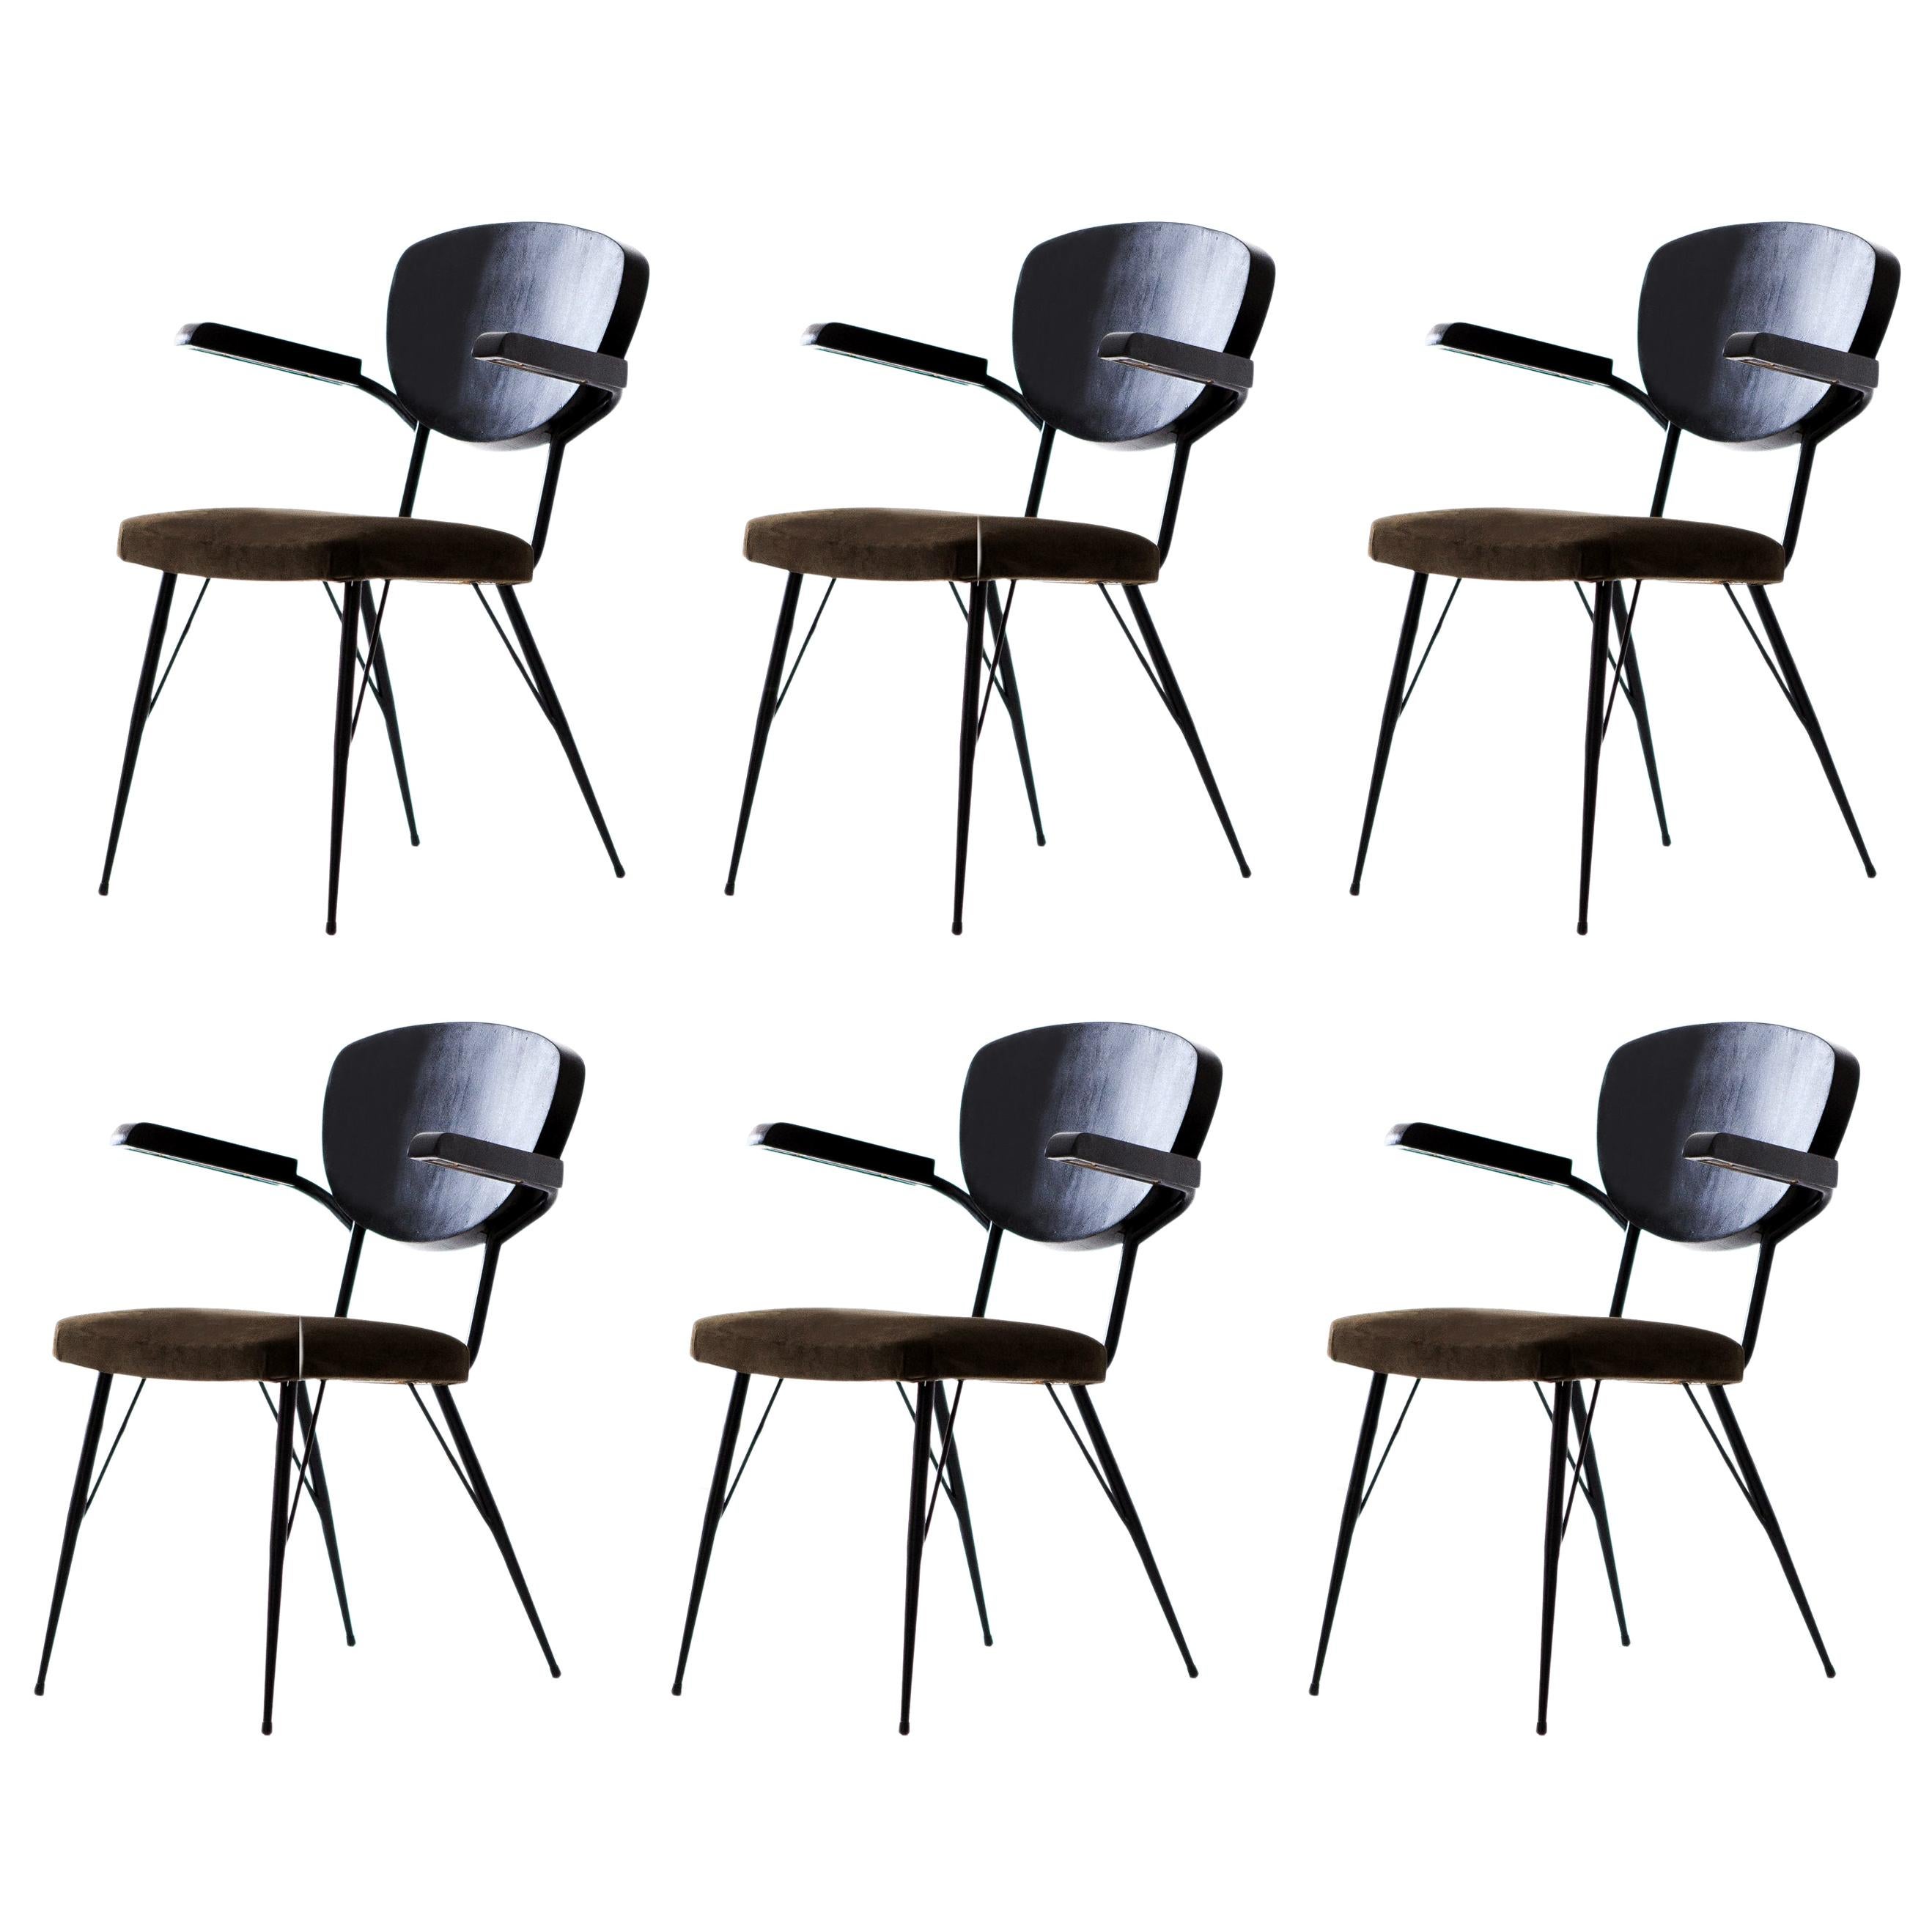 Set of Six Italian Dining Chairs with Natural Suede Leather Seat